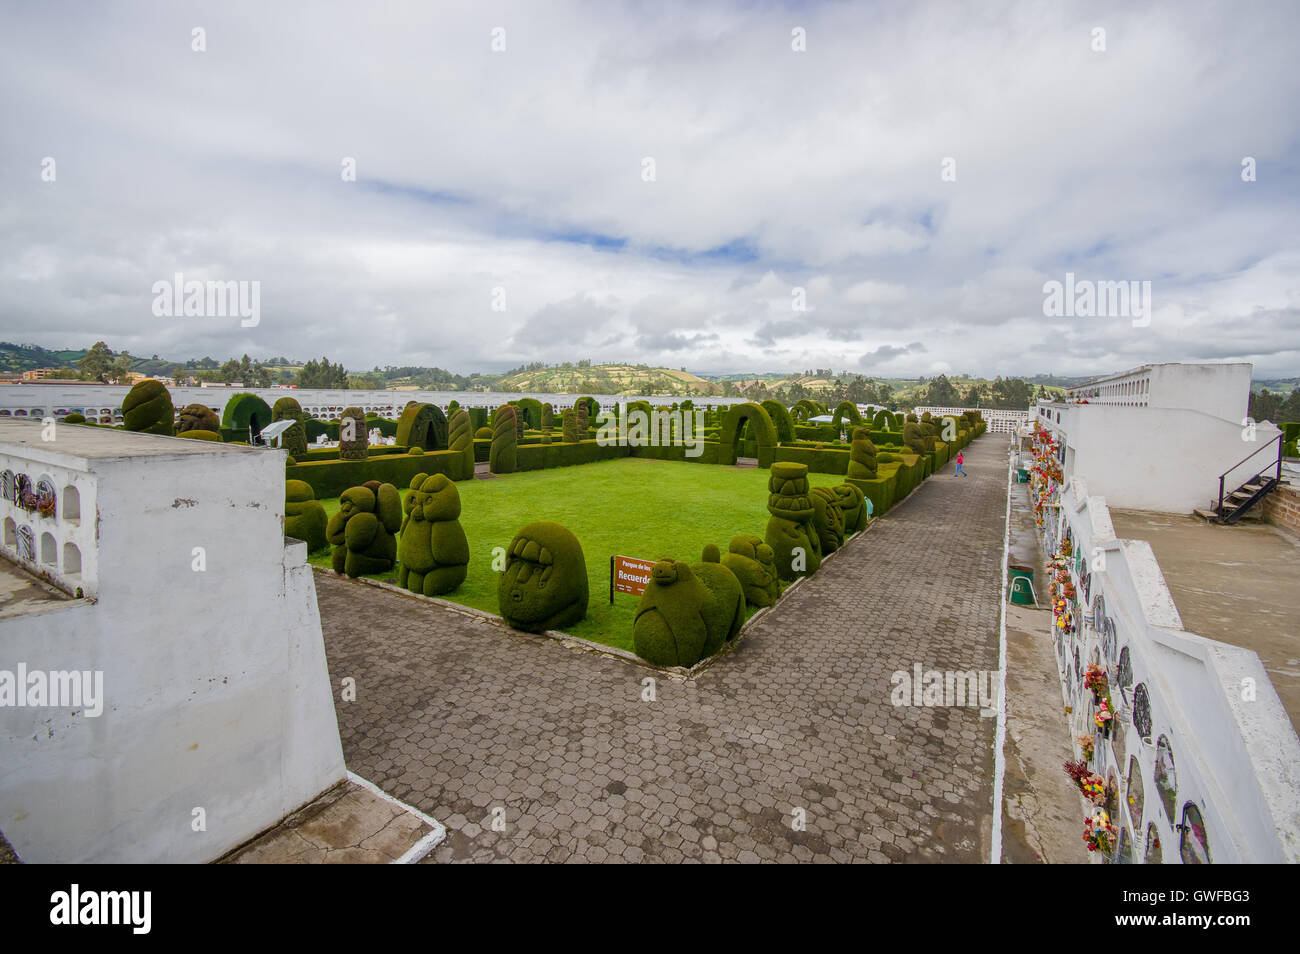 TULCAN, ECUADOR - JULY 3, 2016: overview of the topiary garden located in the cemetery Stock Photo